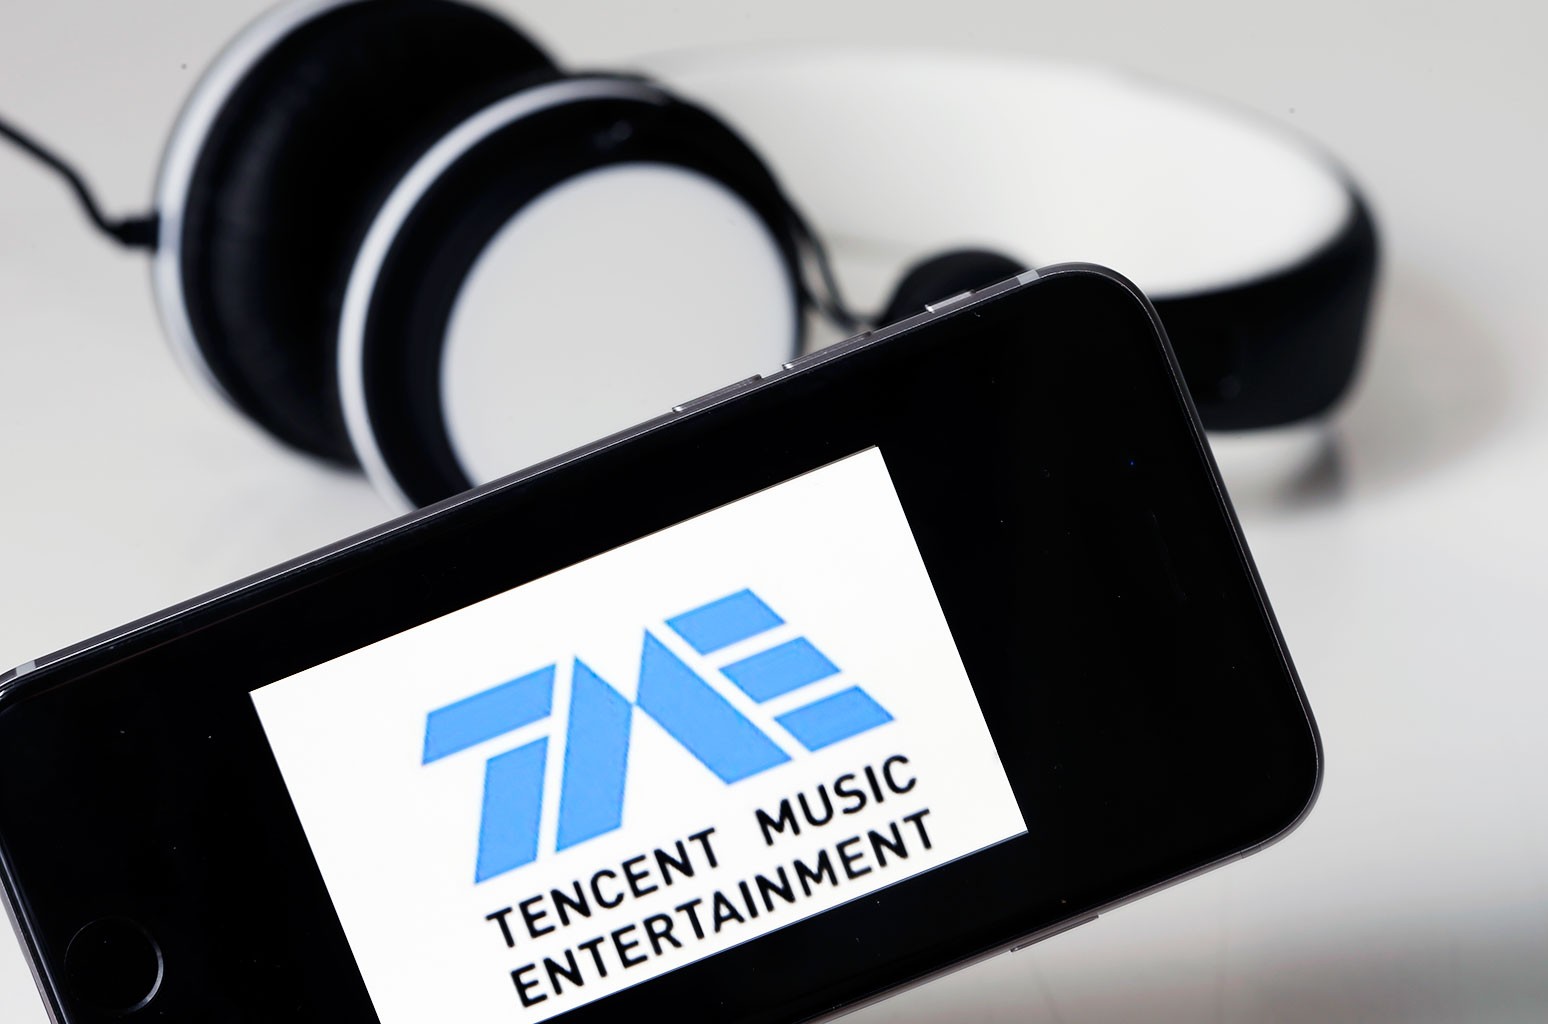 tencent-music-entertainment-phone-2019-billboard-1548-compressed